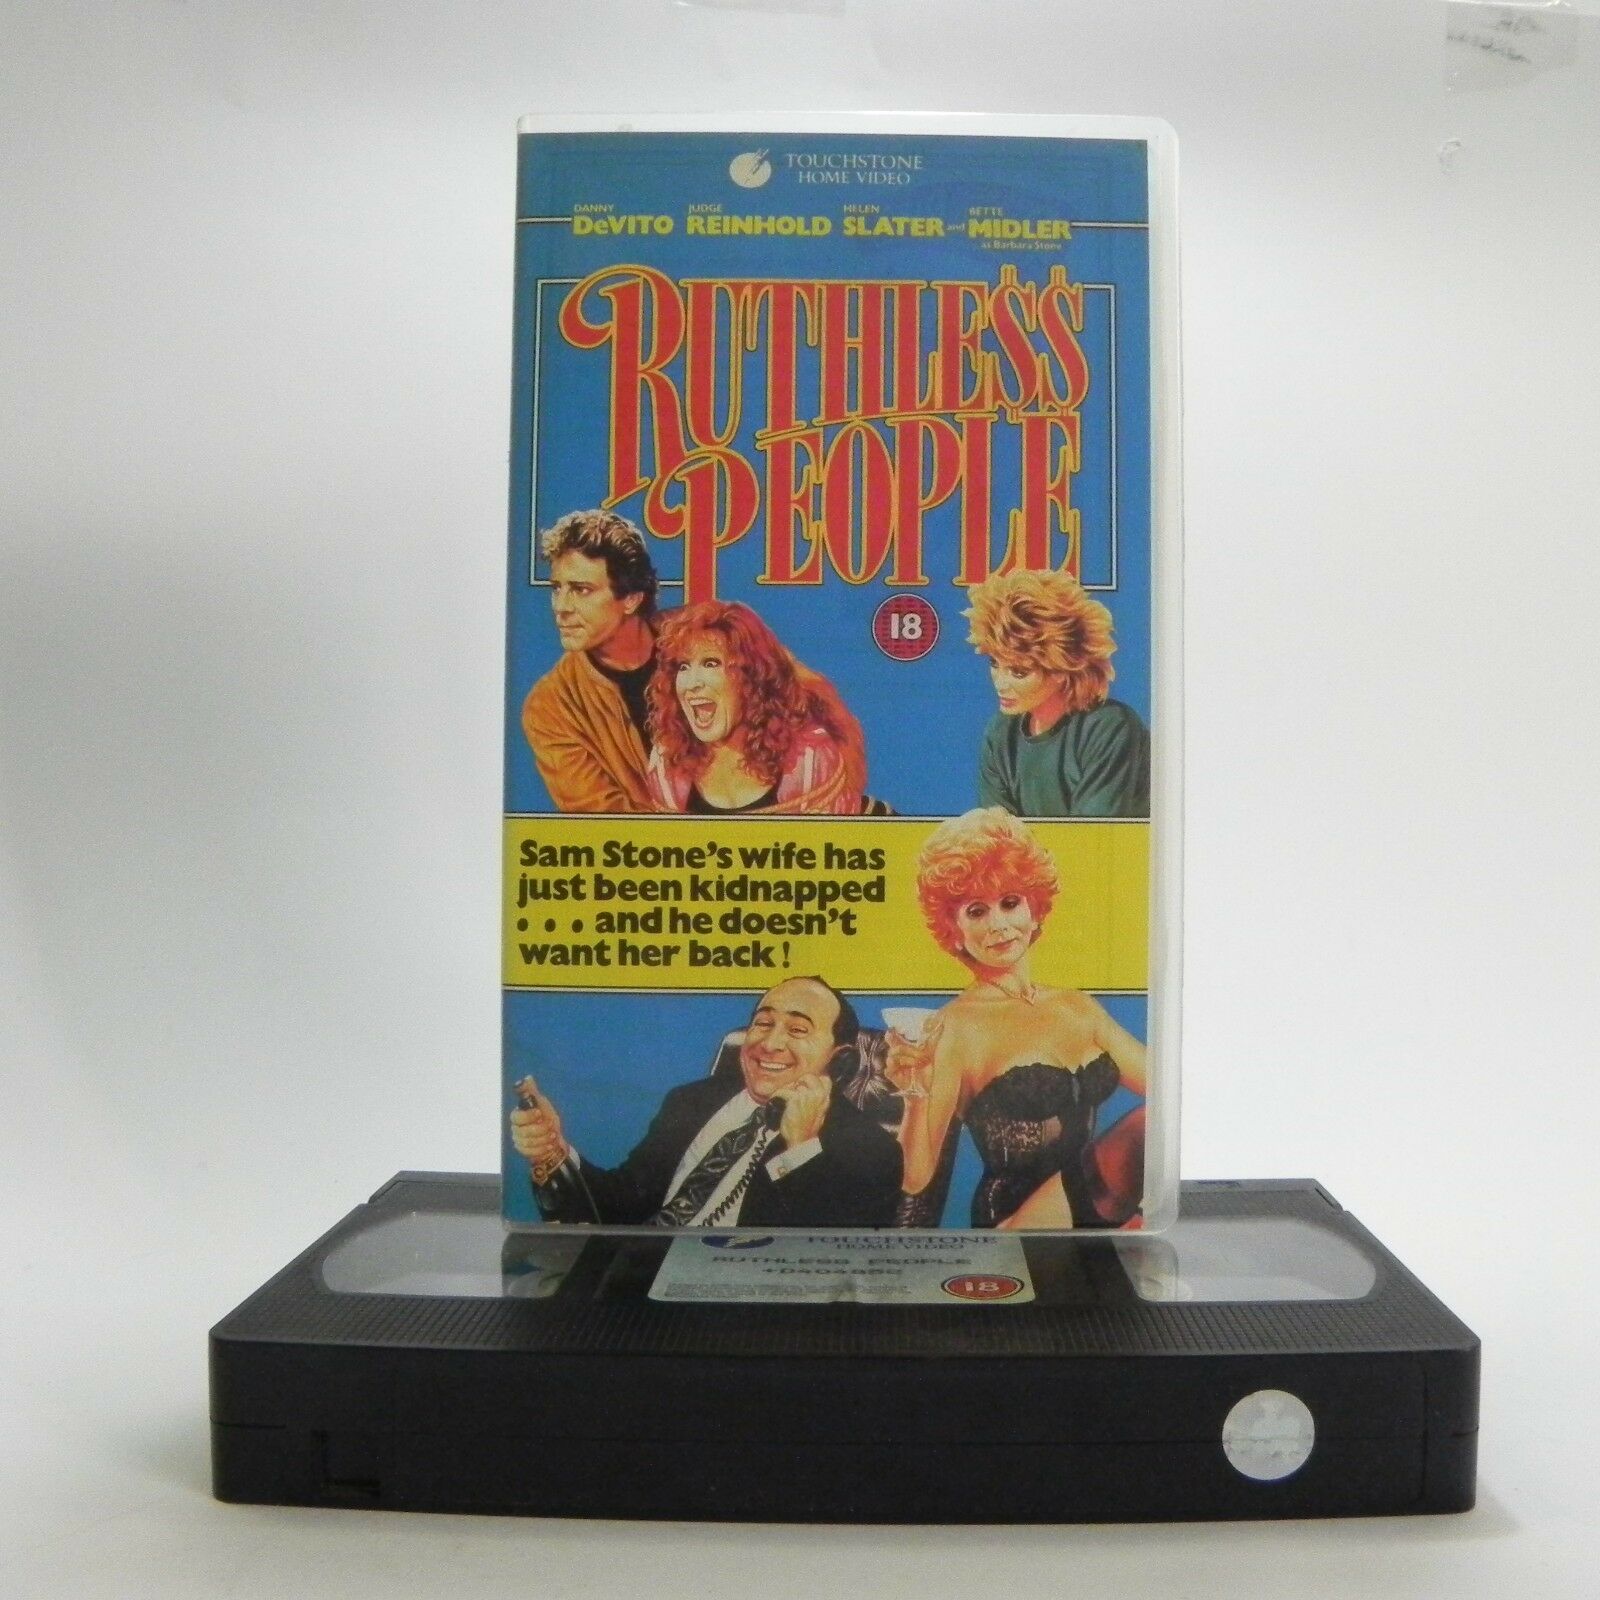 Ruthless People: Comedy Classic (1986) - Danny DeVito - Bette Midler - Pal VHS-